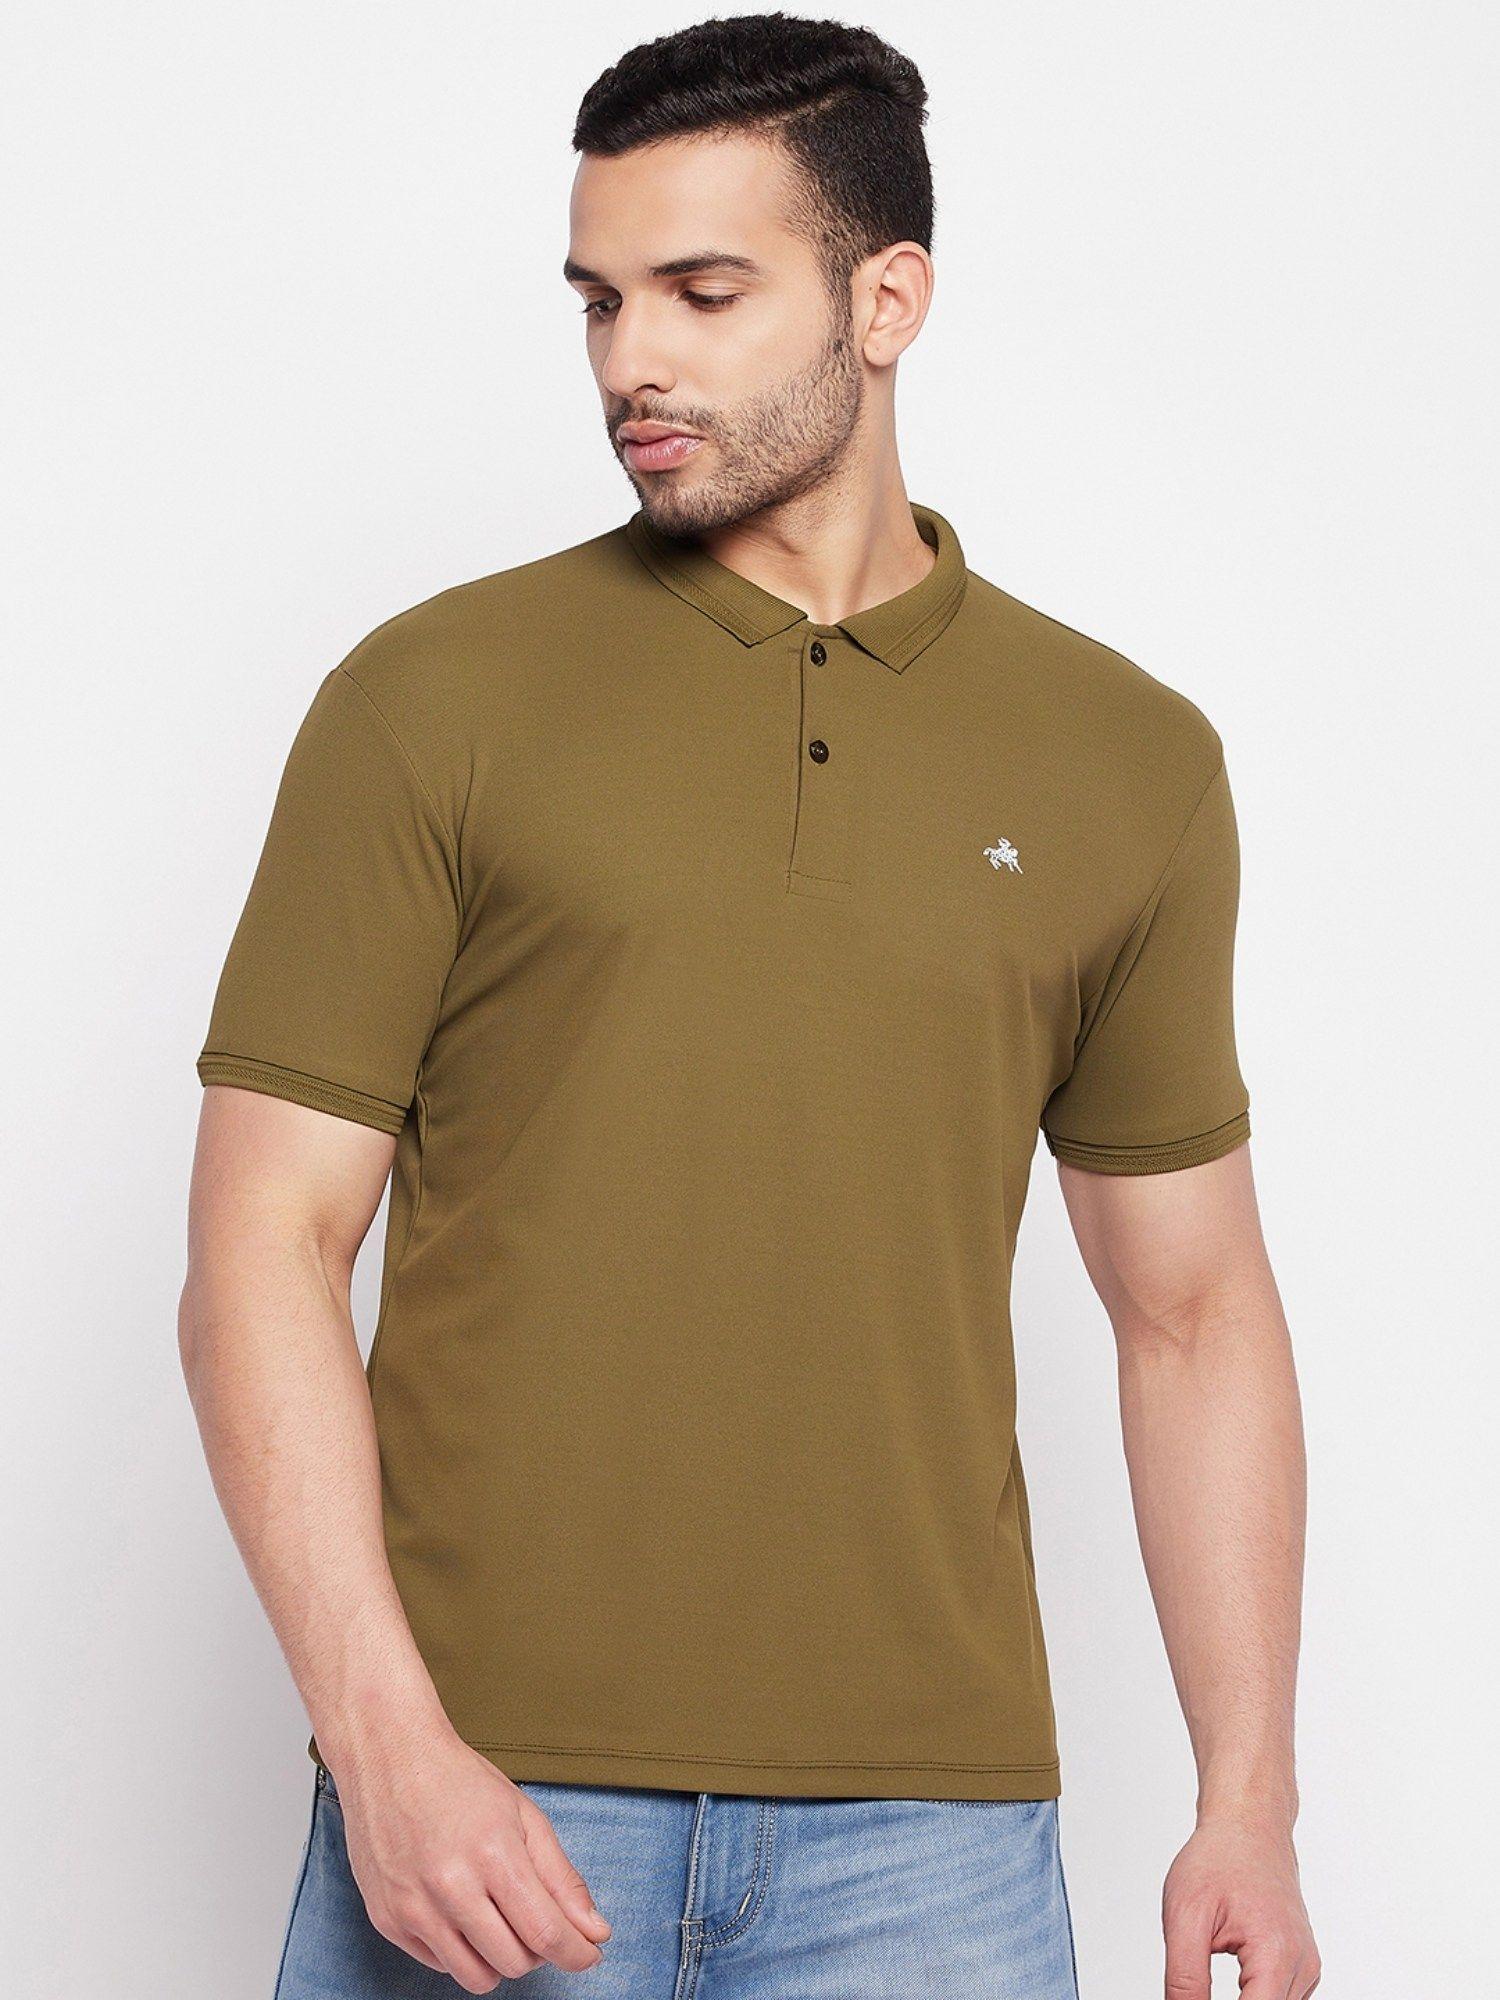 men's olive printed polo neck t-shirt